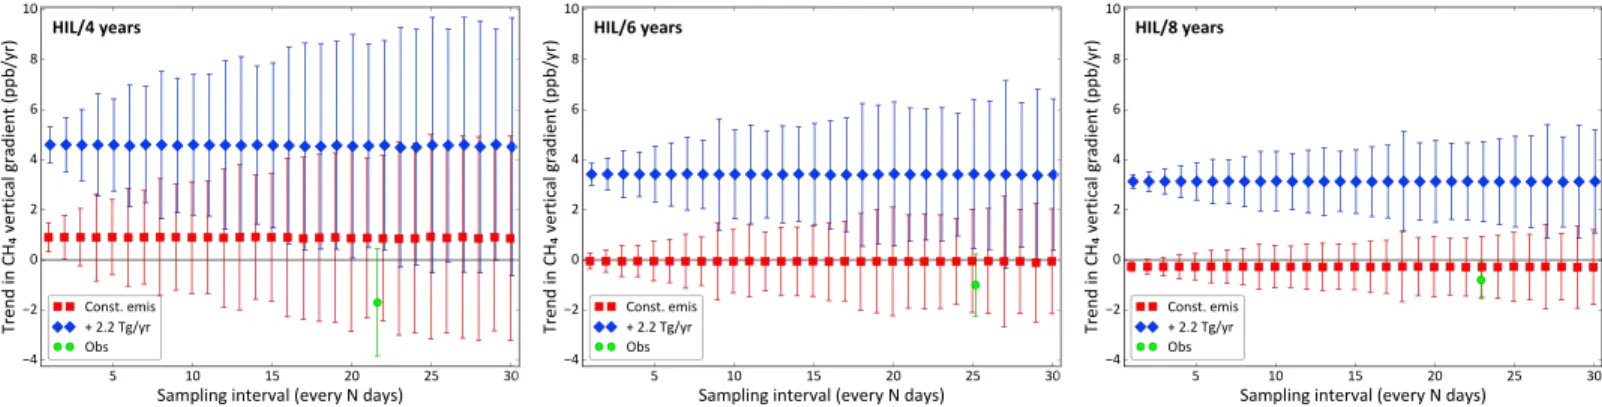 Figure 7 shows that for a given sampling frequency and length of record, the ﬁ tted trend to the sampled ver- ver-tical gradient for a given emission scenario can have a range of values, due to the inherent variability of the atmospheric CH 4 ﬁ eld